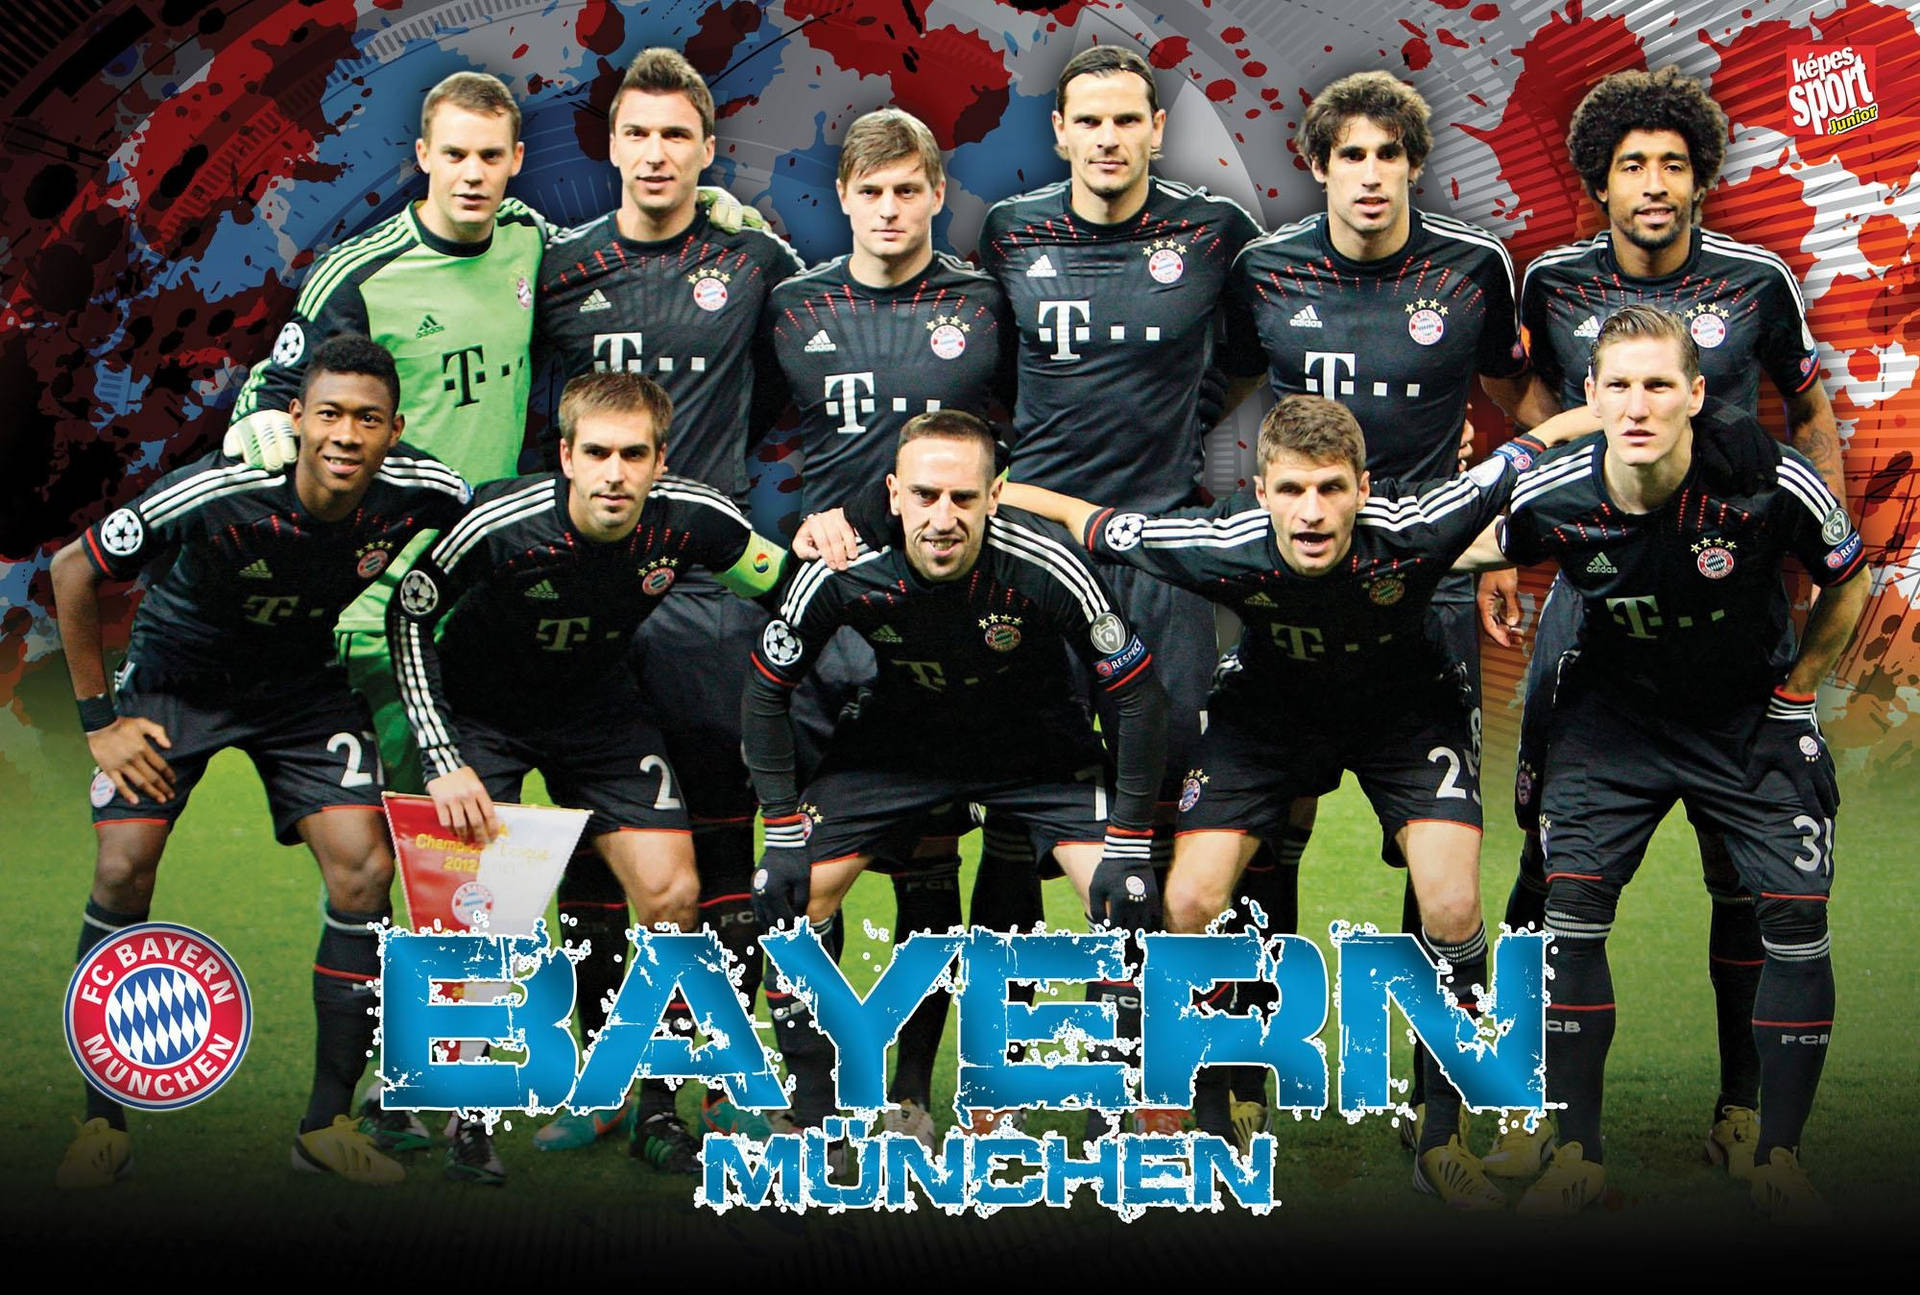 Captivating Moment in HD of FC Bayern Munchen in Action Wallpaper